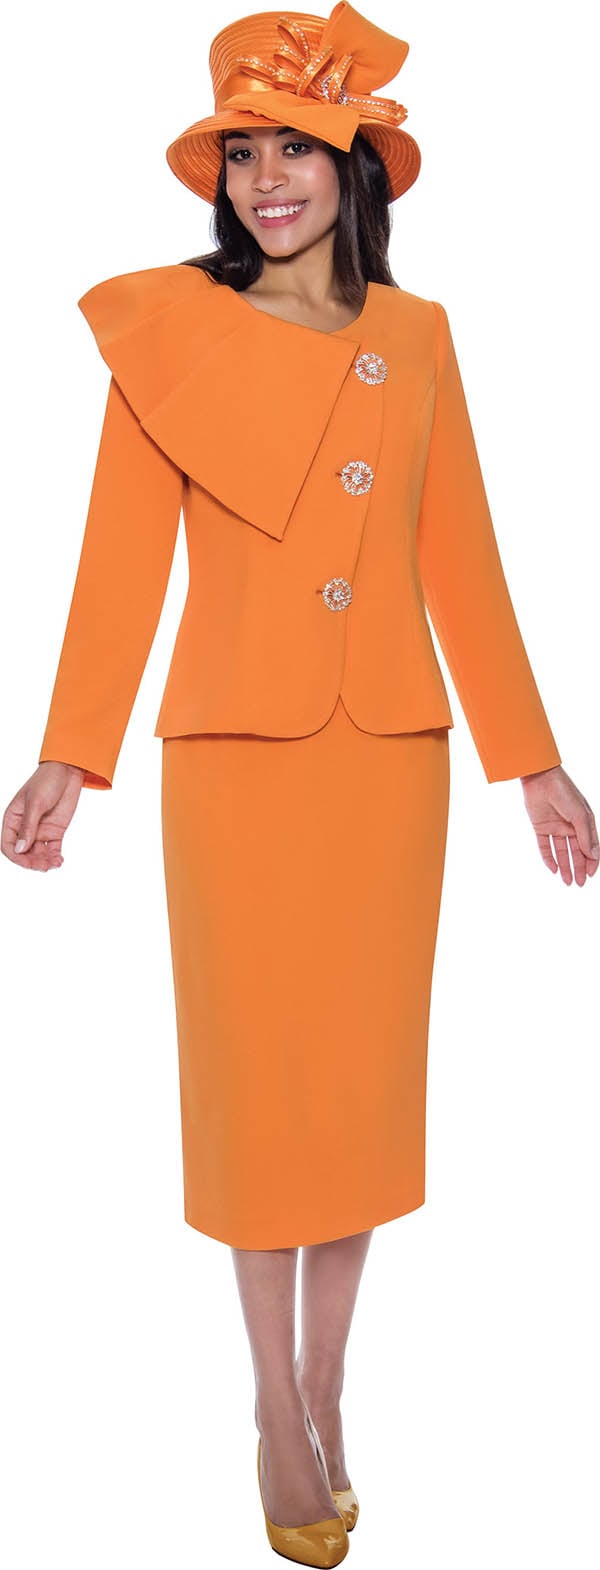 GMI 2 Piece Skirt Suit G9782-OR Size 12